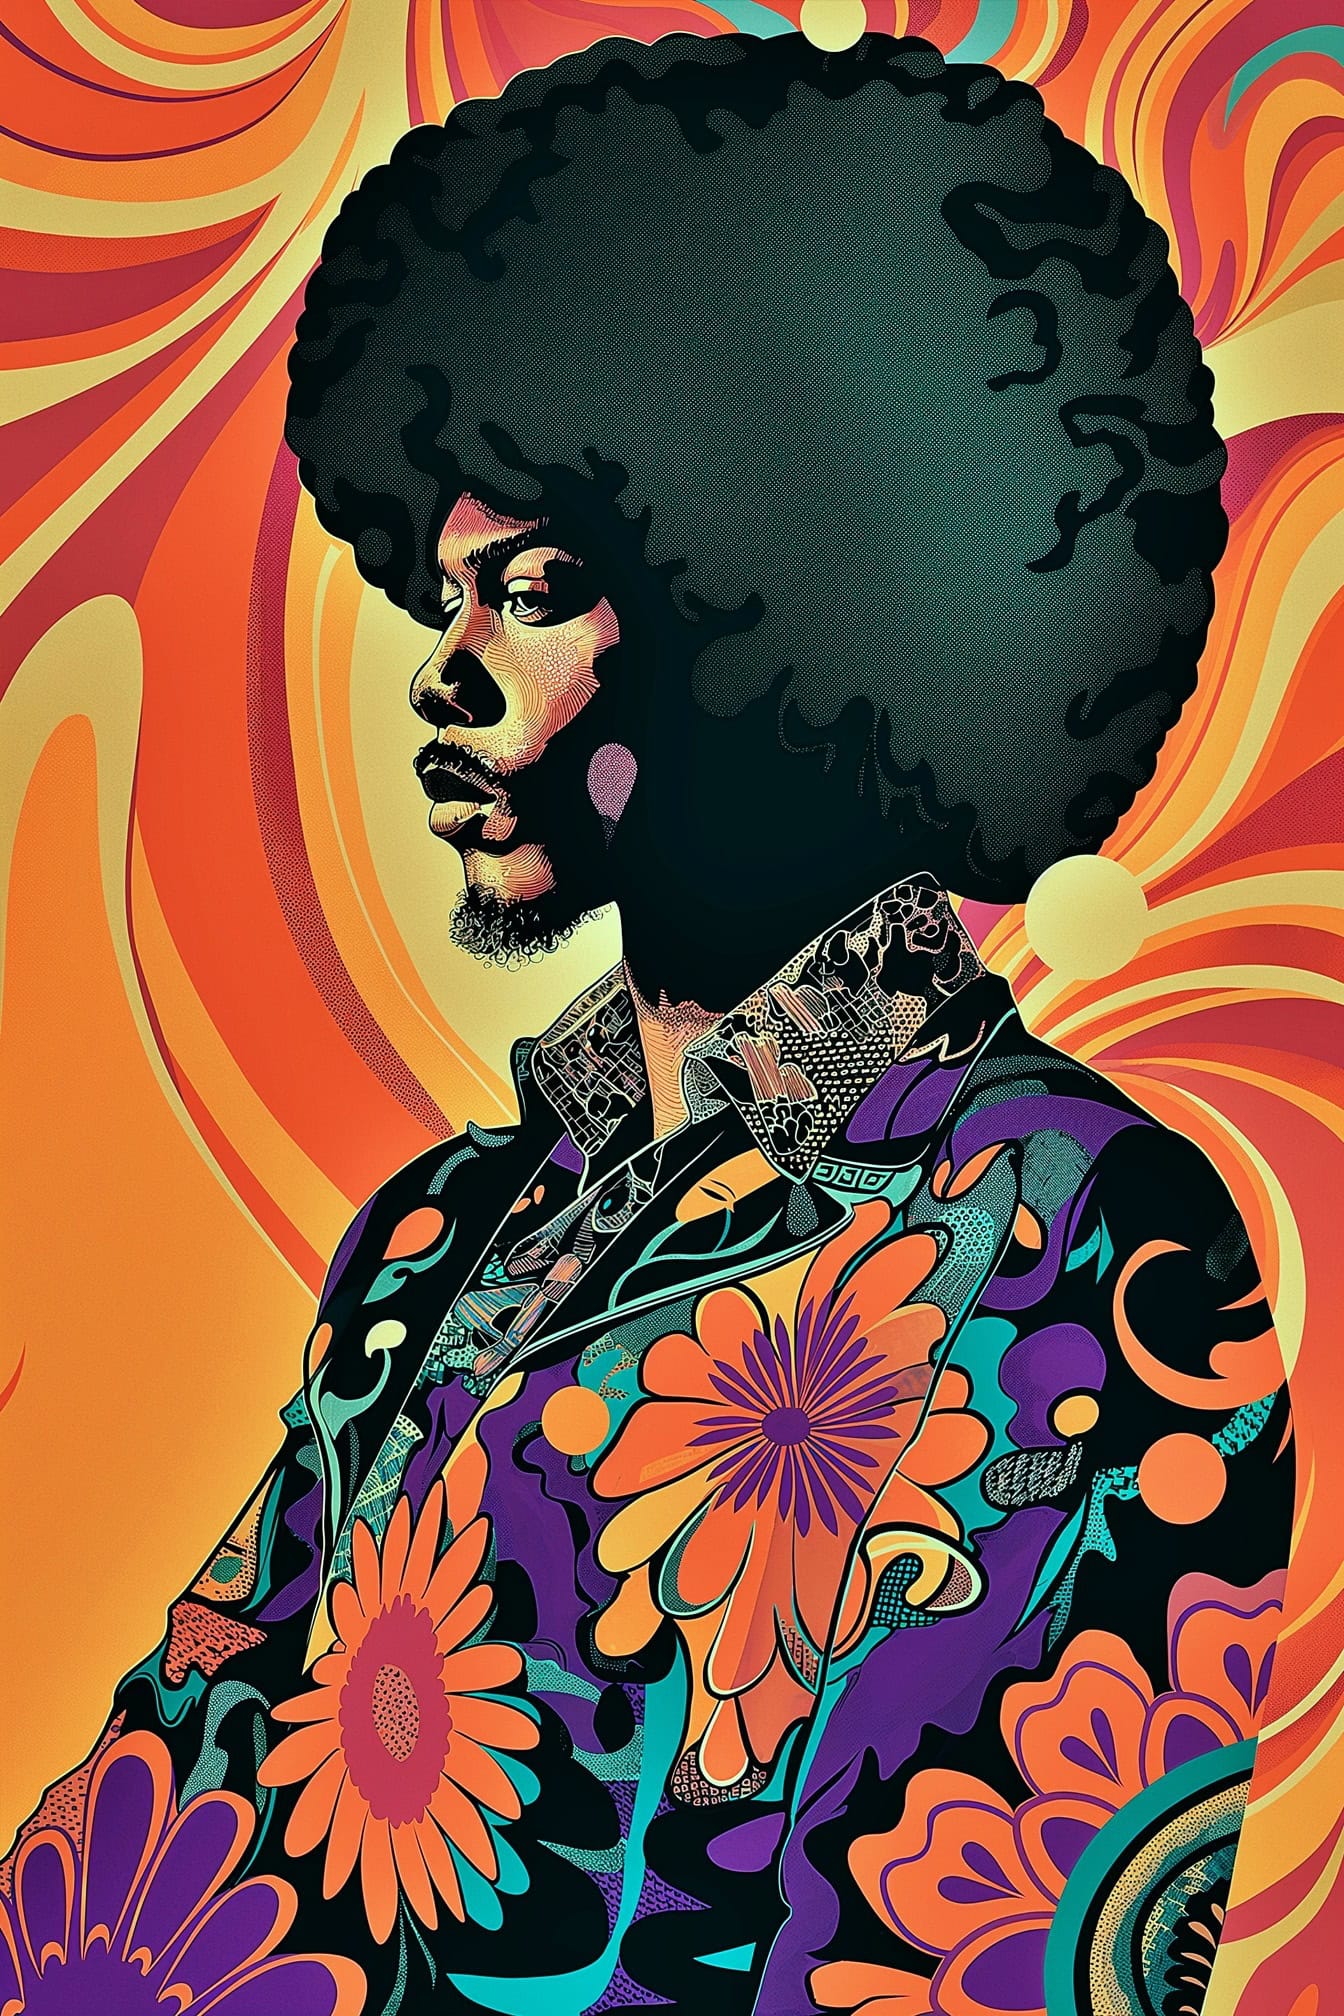 Vibrant poster with portrait of Jimi Hendrix with a large afro hairstyle and abstract background in pop art style